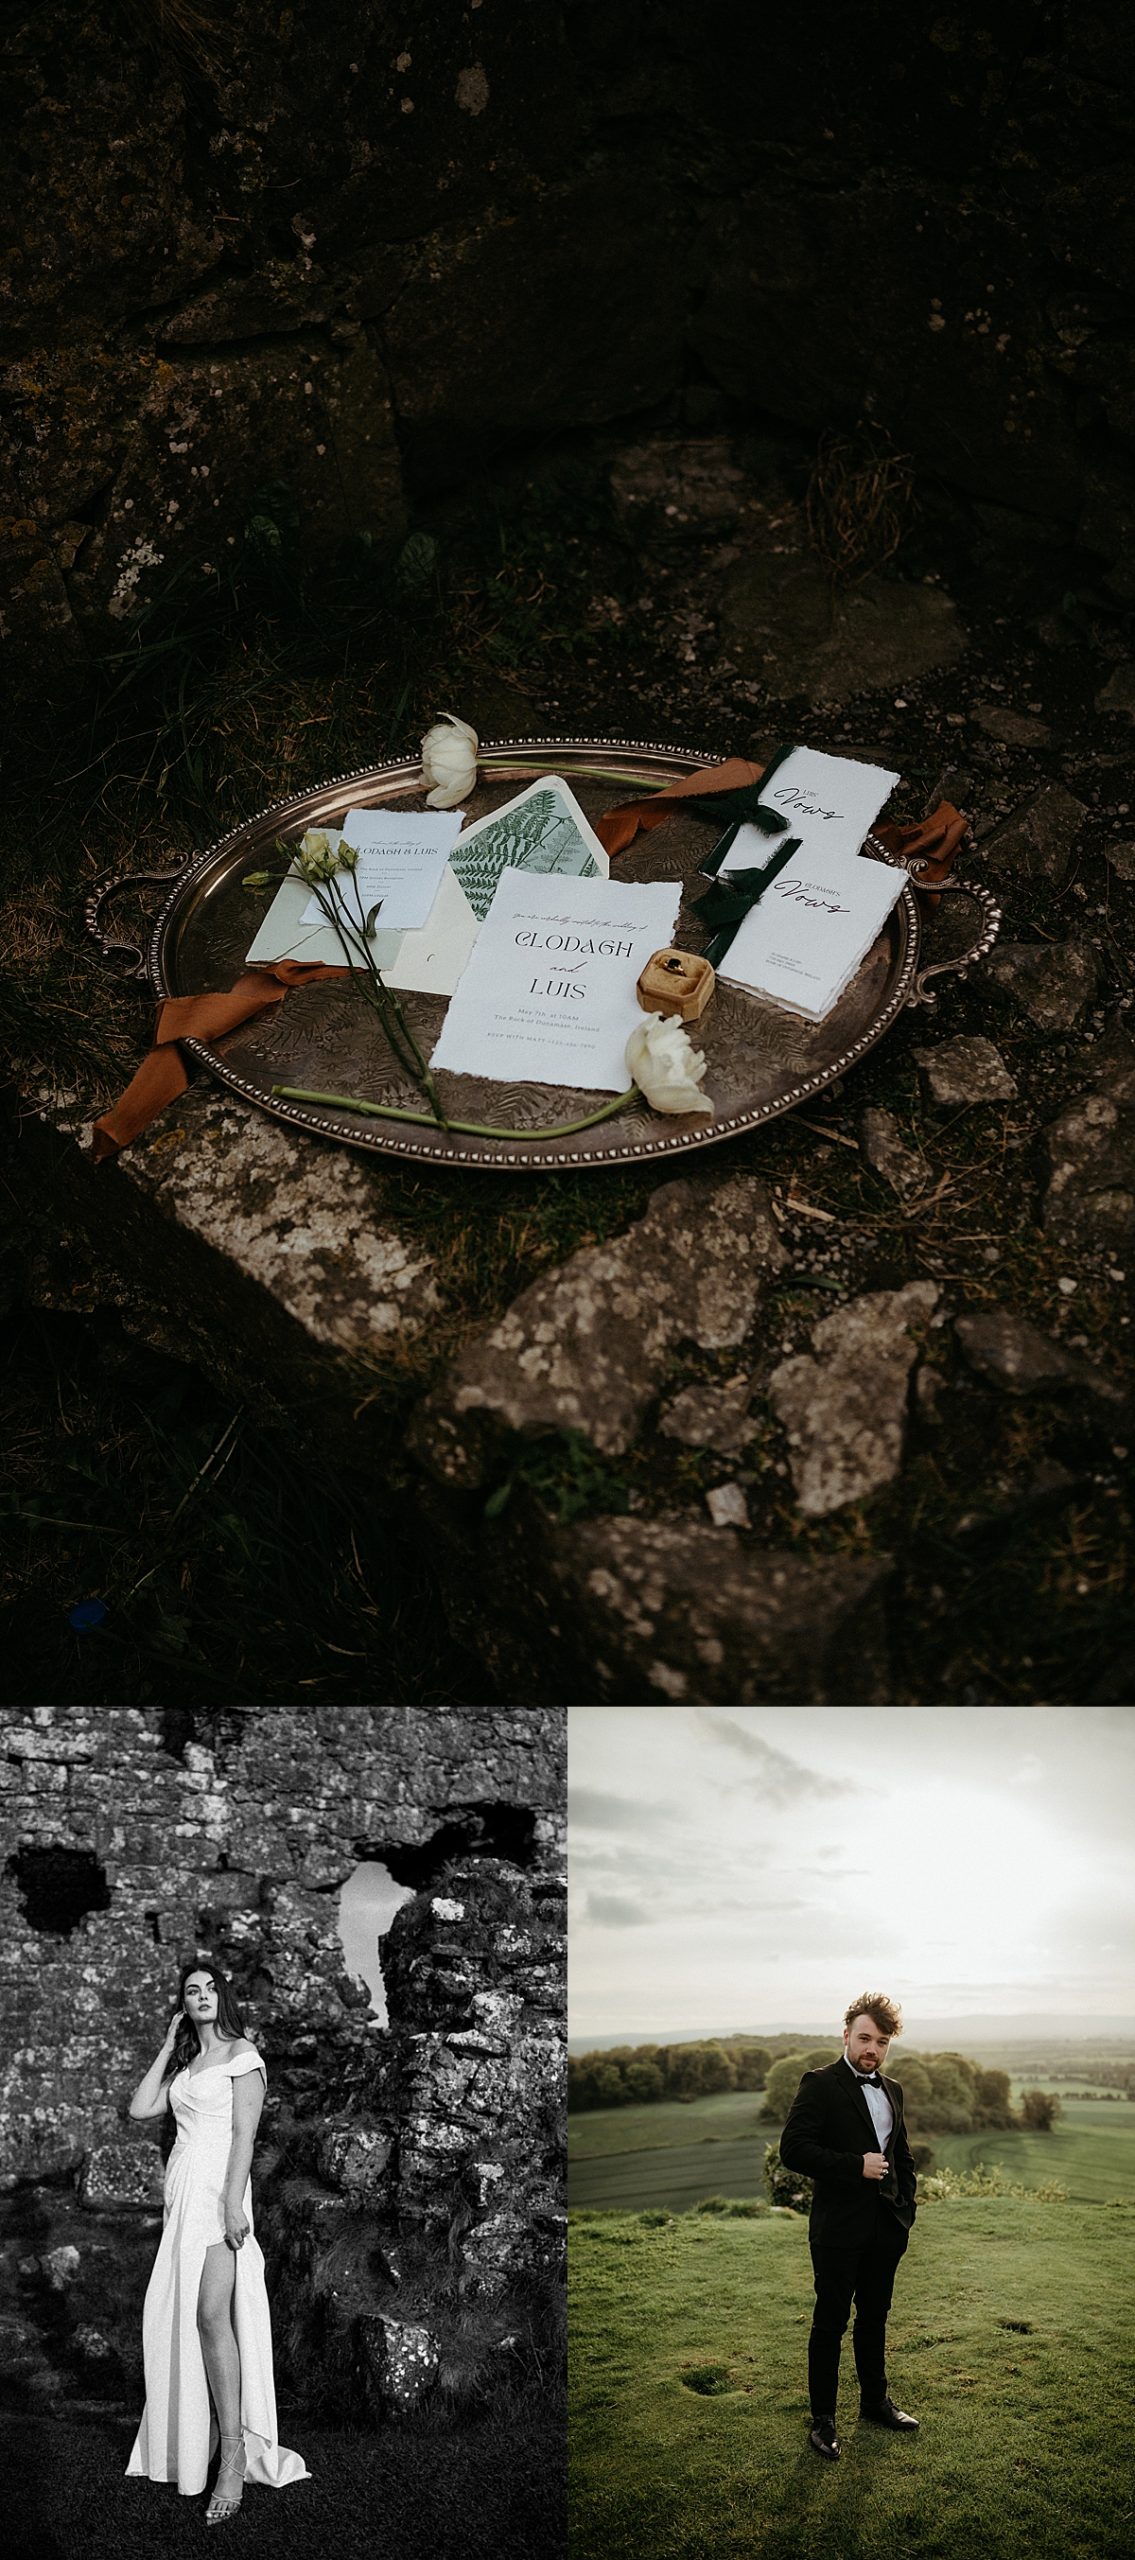 wedding flaylay of invites and wedding rings at Ireland castle ruin elopement 